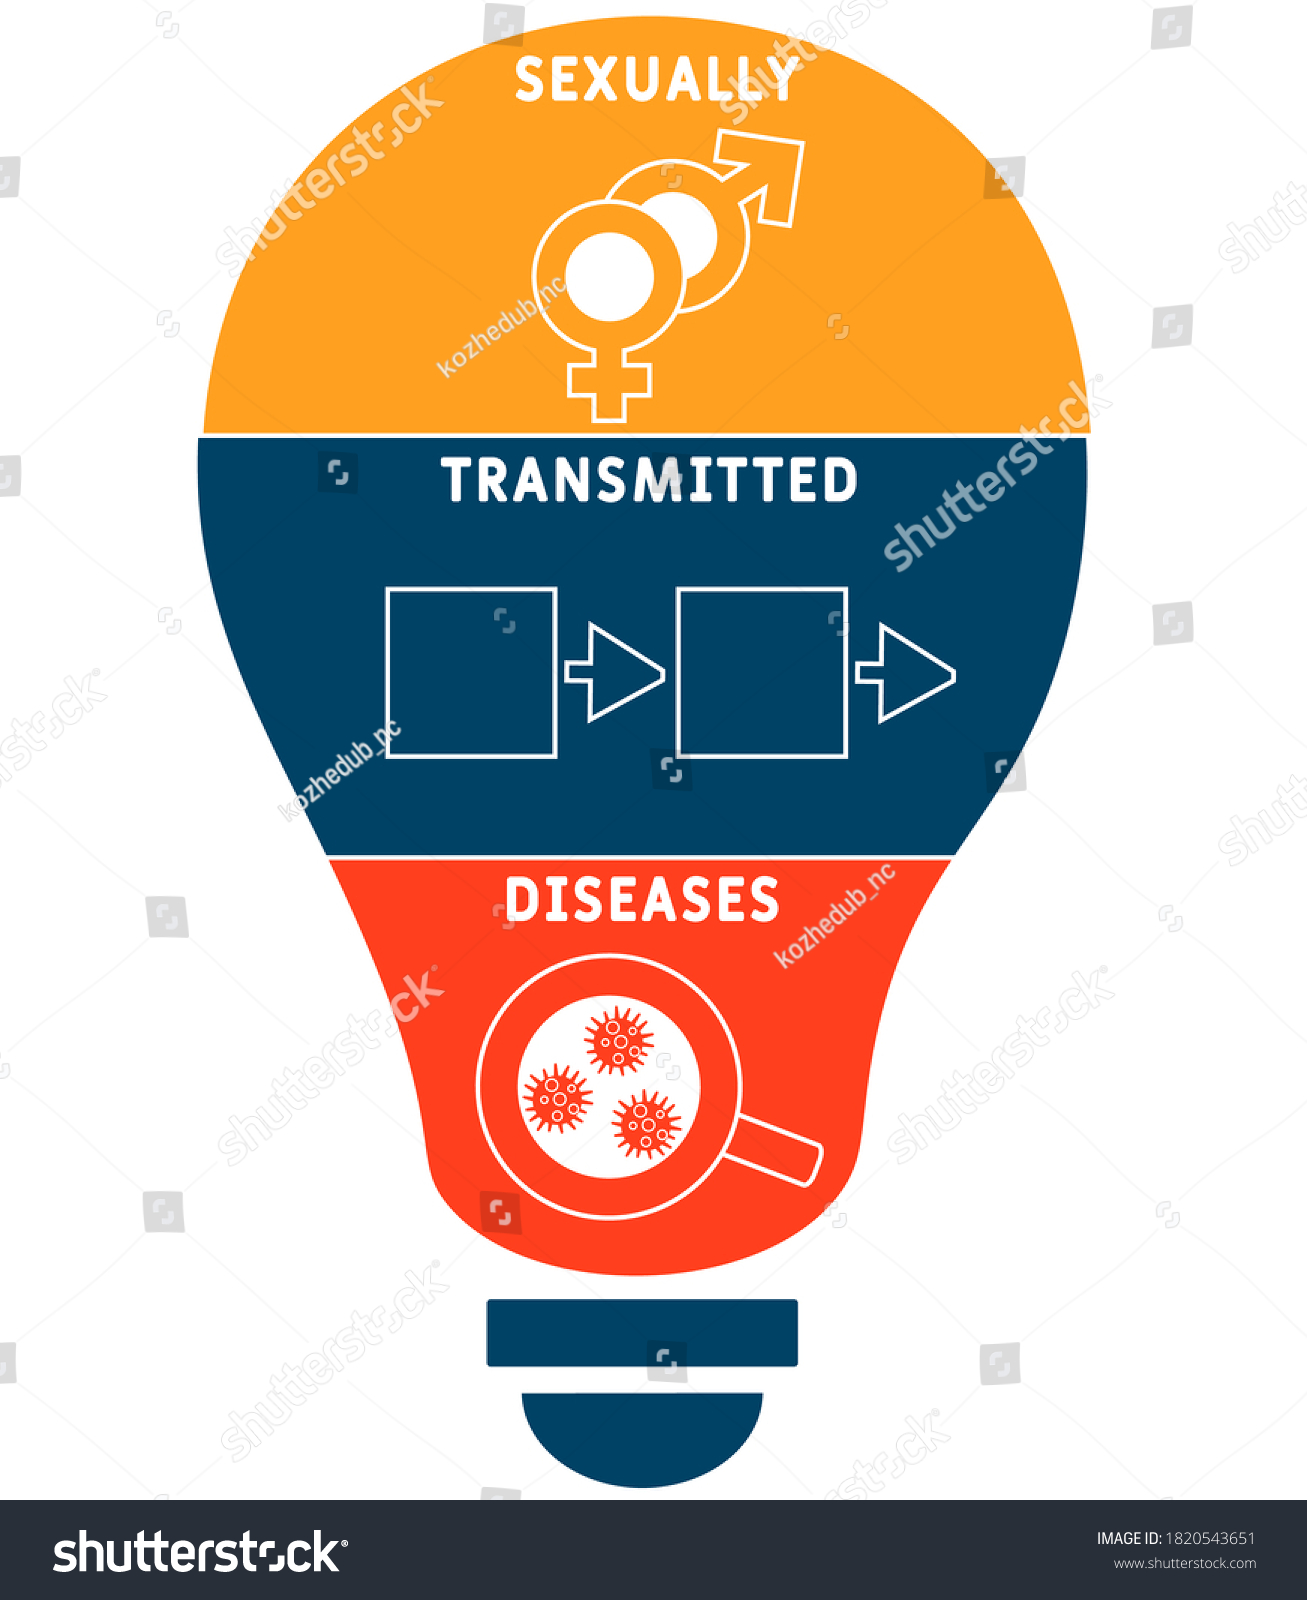 Std Sexually Transmitted Diseases Acronym Medical Stock Vector Royalty Free 1820543651 9177